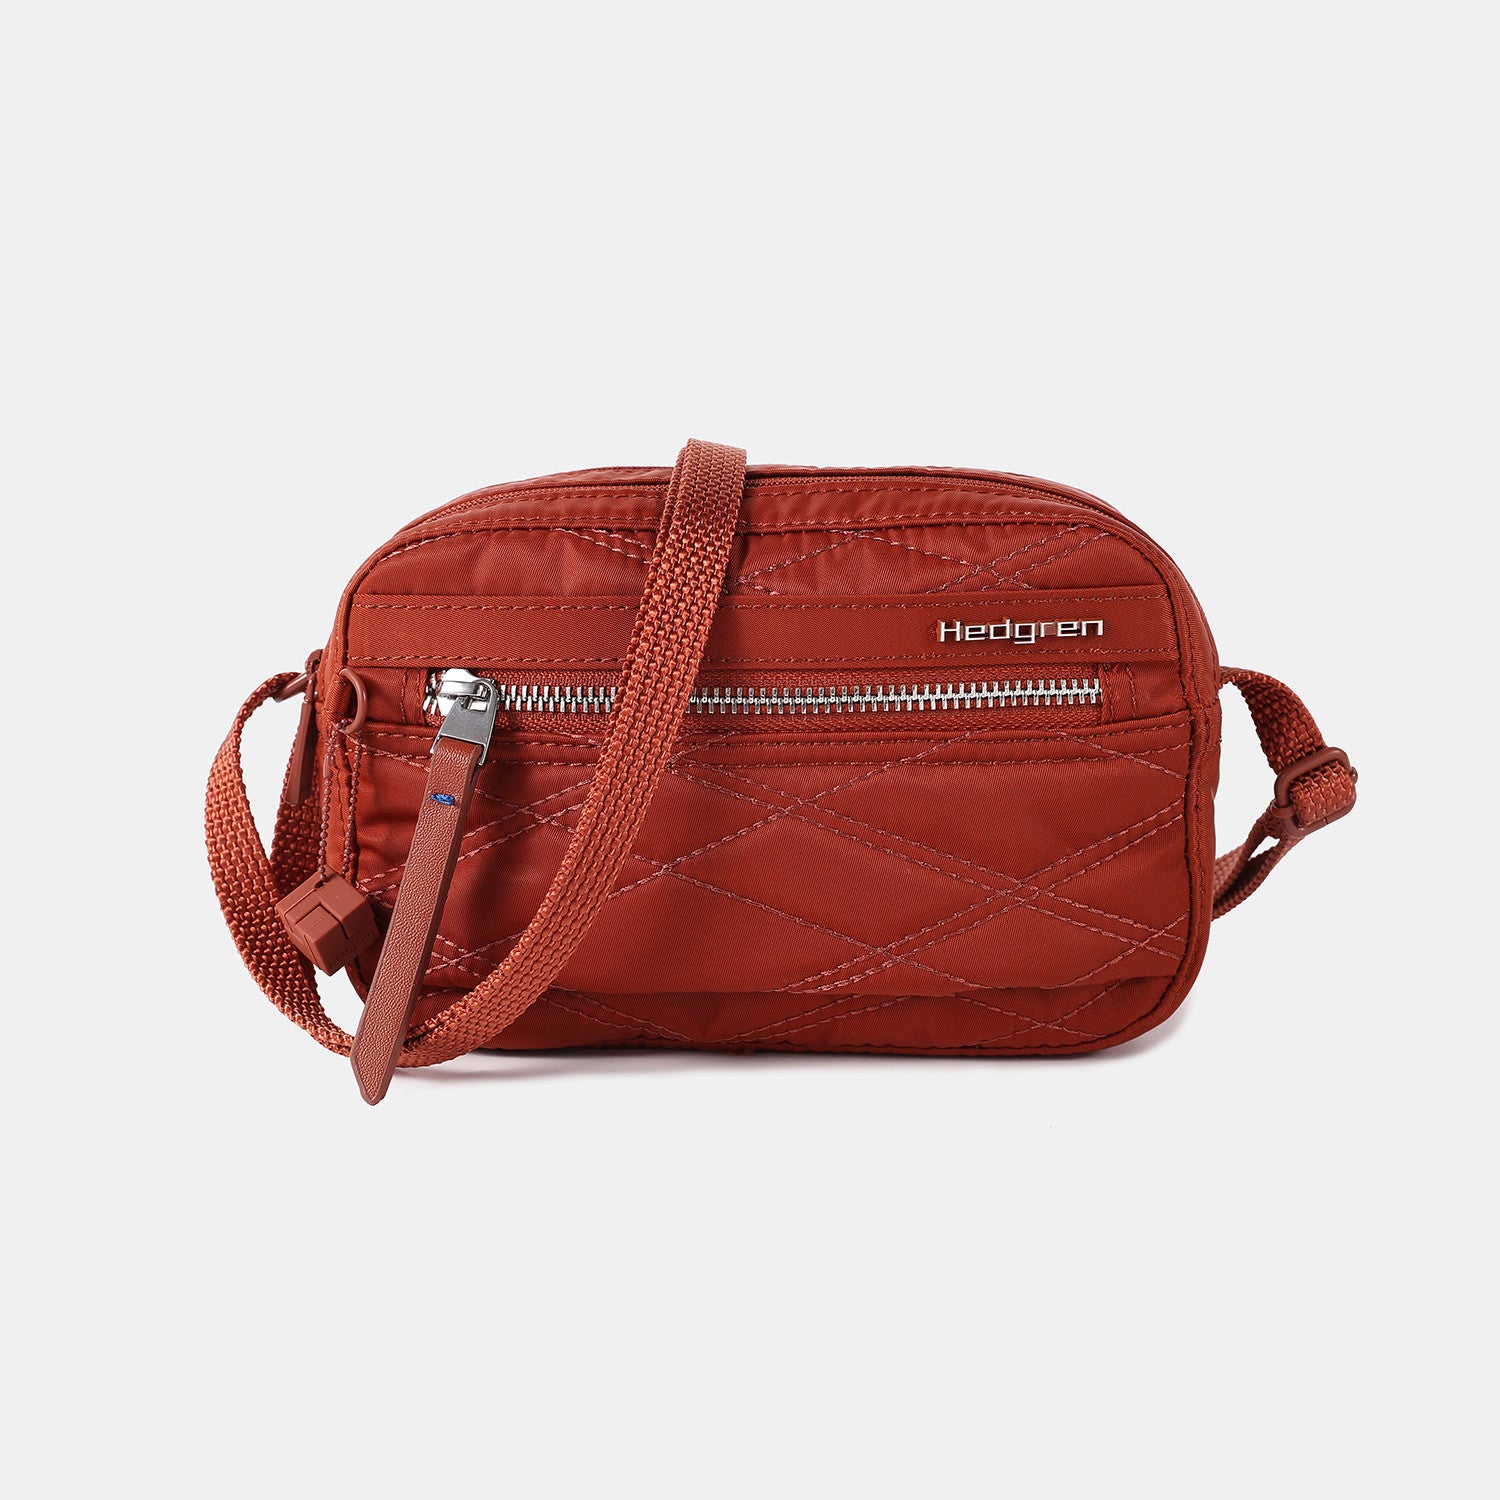 Hedgren Maia Small RFID Crossover Bag with 2 Compartments - Red